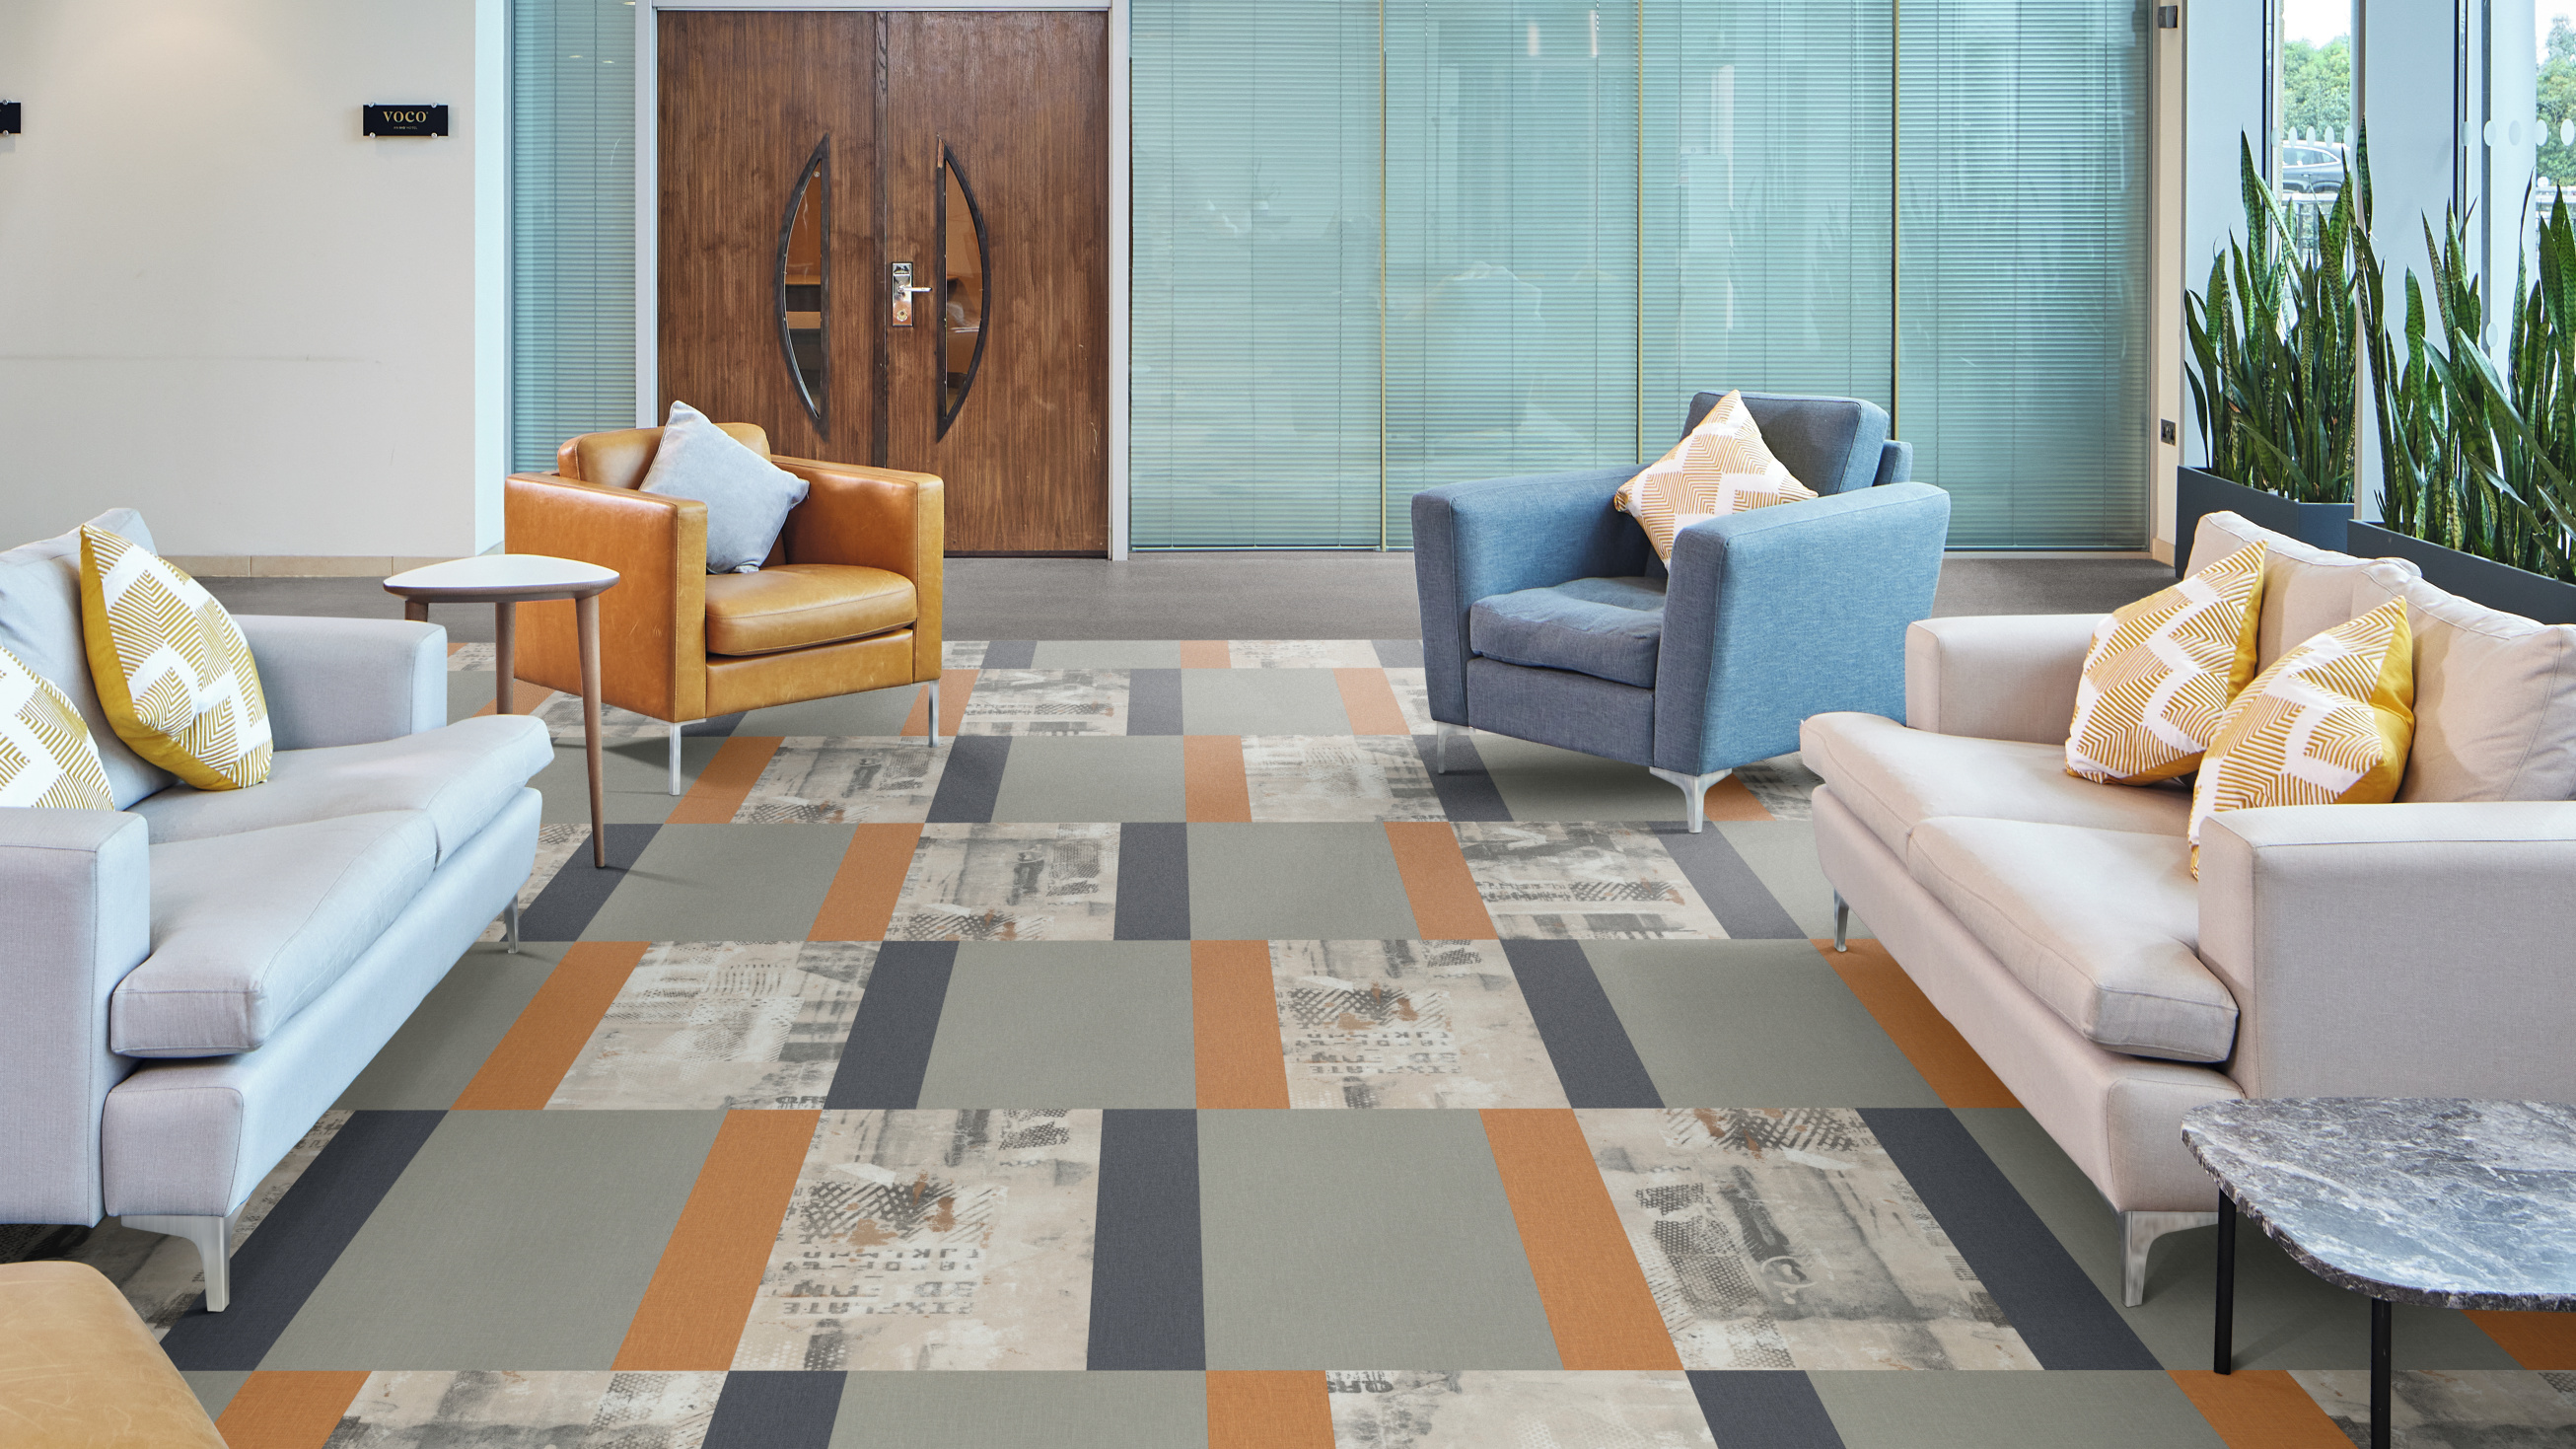 Indigo SP720, Amber SP721, Chalk Grey SP725, San Marco SP729 and Umbra SP732 create an energetic pattern in a hotel lobby